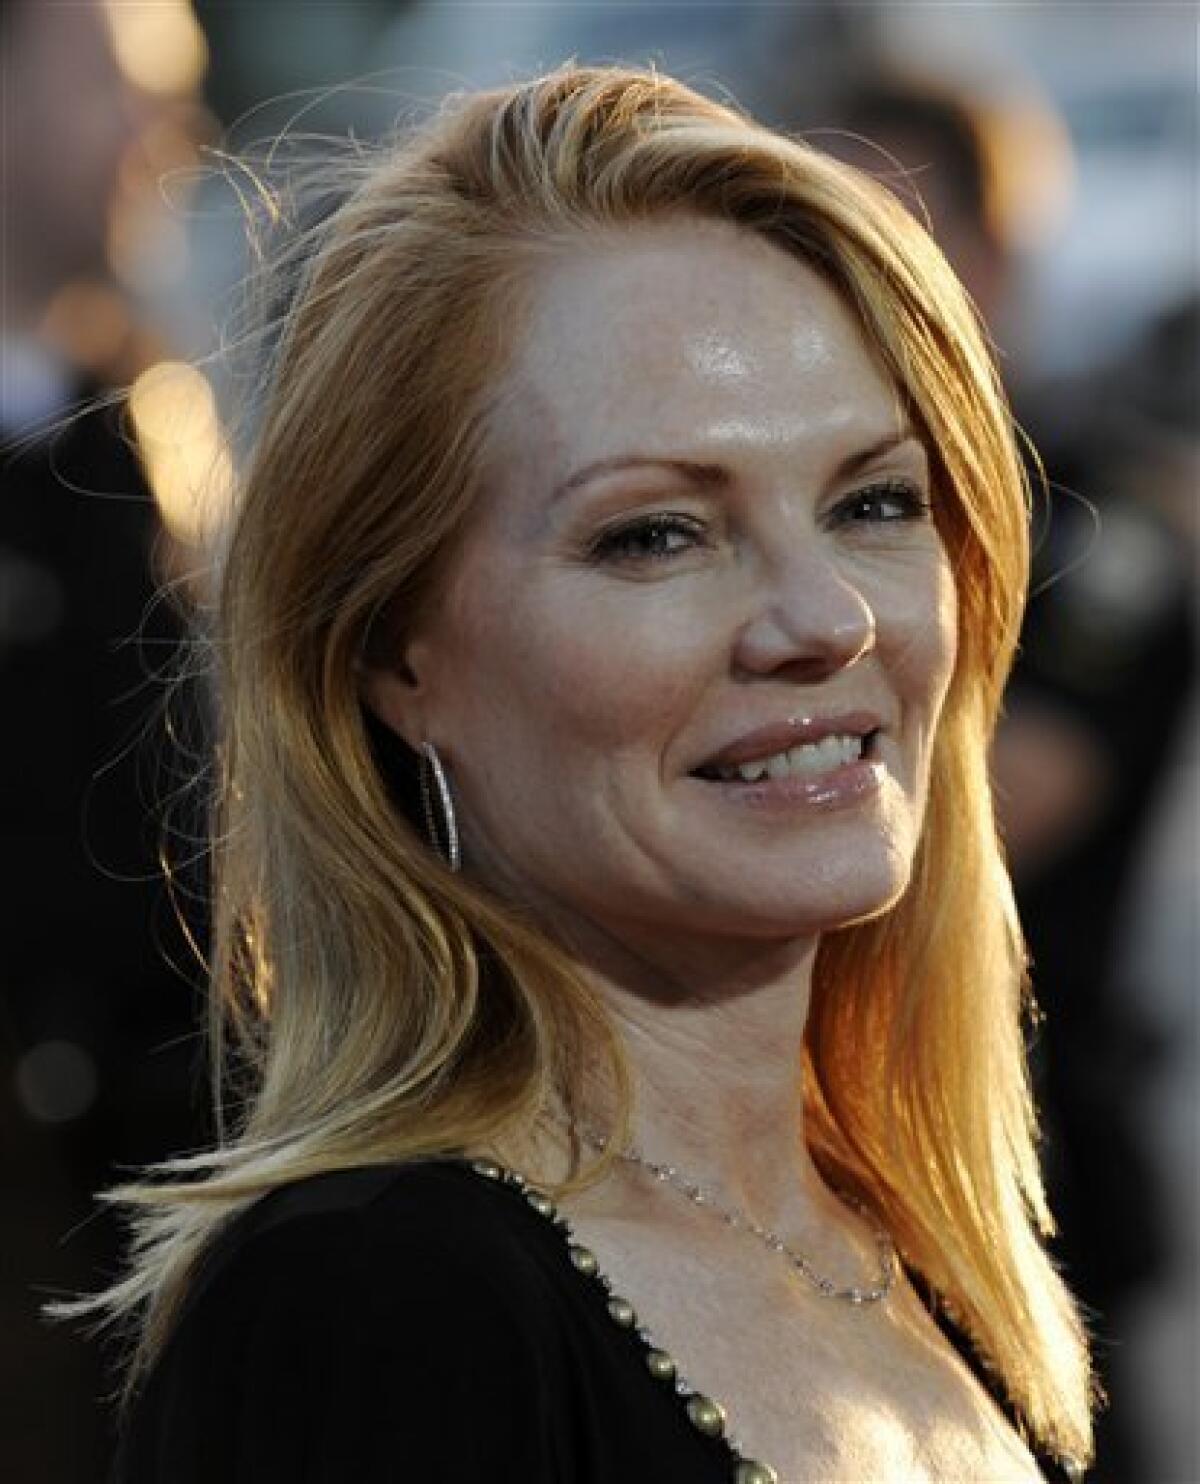 In this Sept. 17, 2008 file photo, Marg Helgenberger arrives at the premiere of the film "Appaloosa" at the Academy of Motion Picture Arts and Sciences in Beverly Hills, Calif. (AP Photo/Chris Pizzello, File)